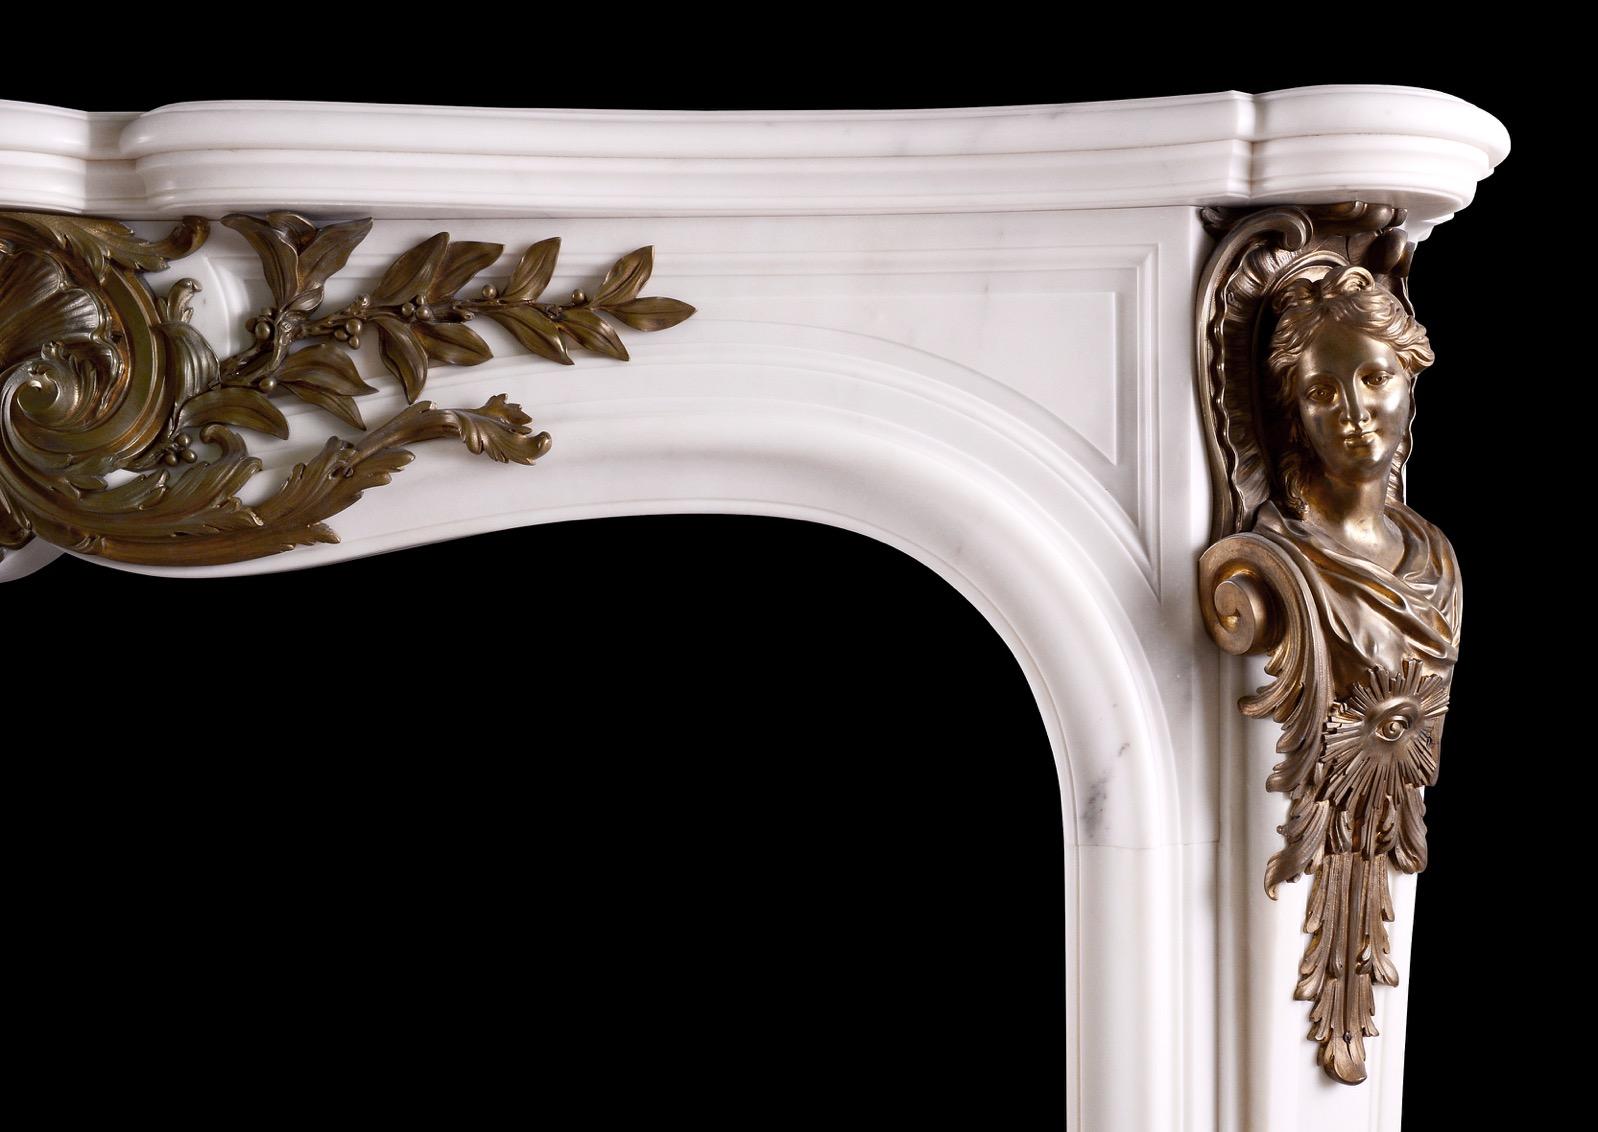 A very fine quality Statuary white marble fireplace with bronze ormolu enrichments. The moulded, panelled jambs with brass busts with acanthus leaves below. The shaped frieze with cast shell and foliage to centre. Shaped moulded shelf above. High